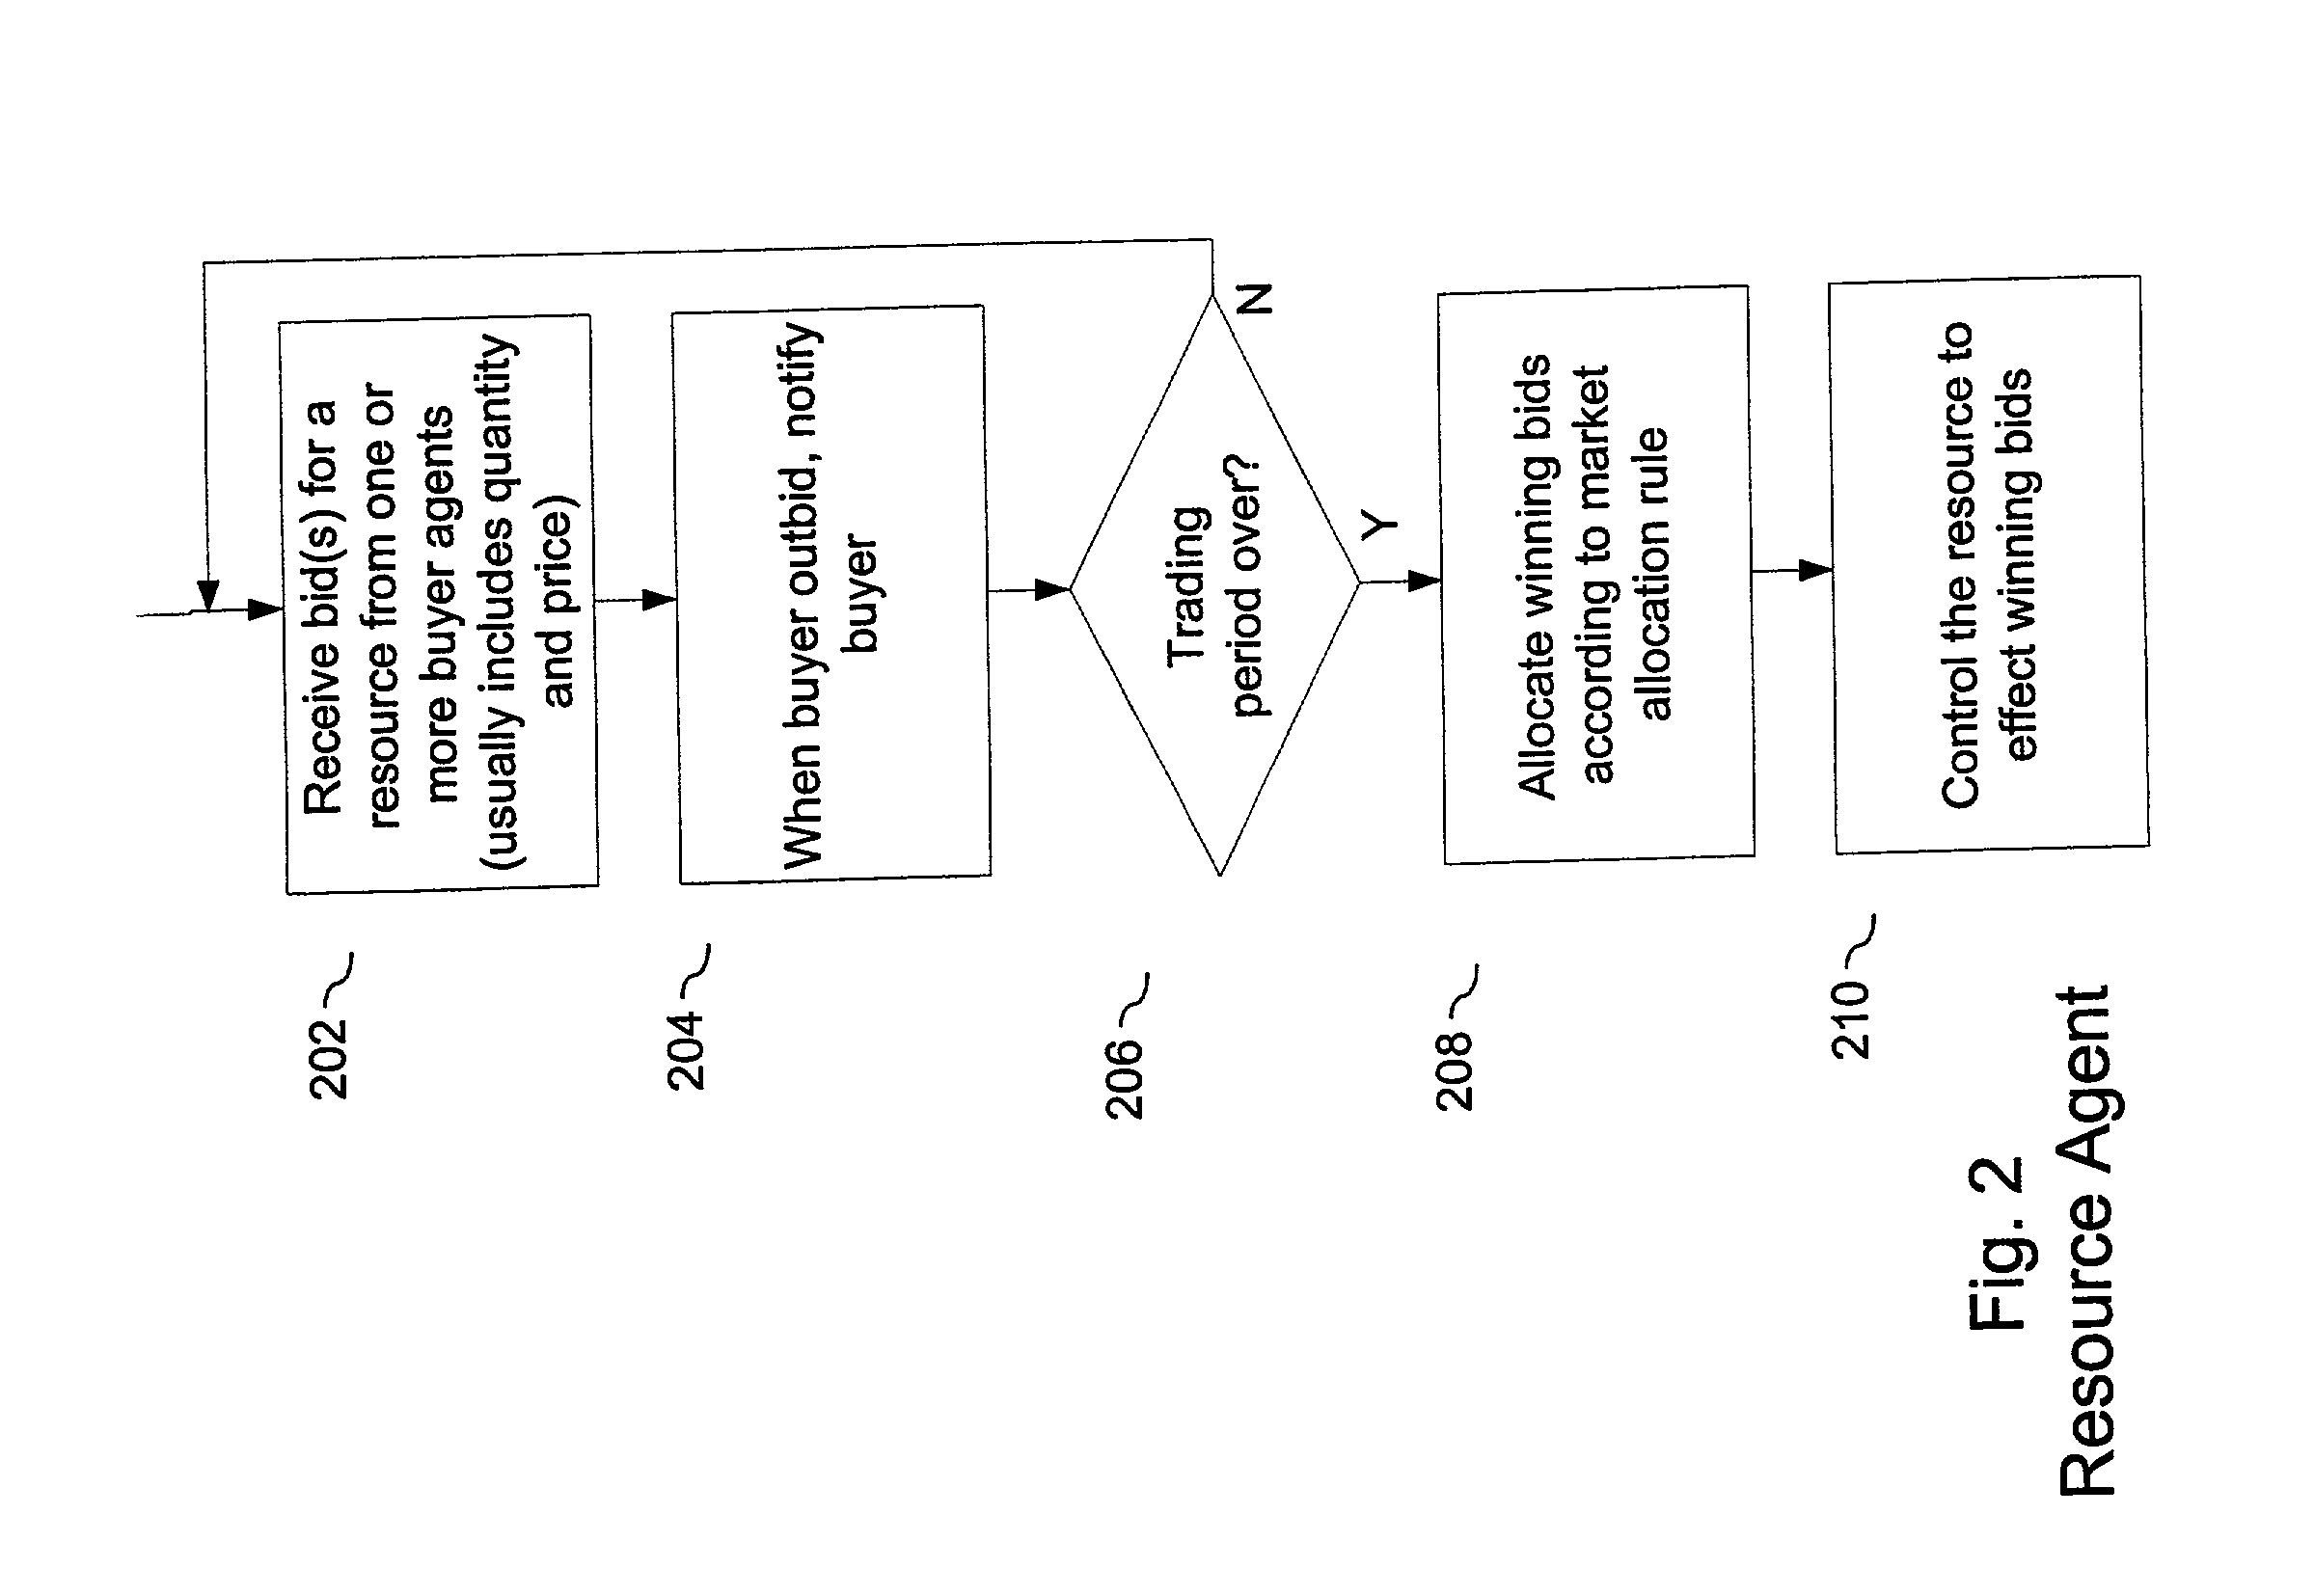 Method and system for market based resource allocation